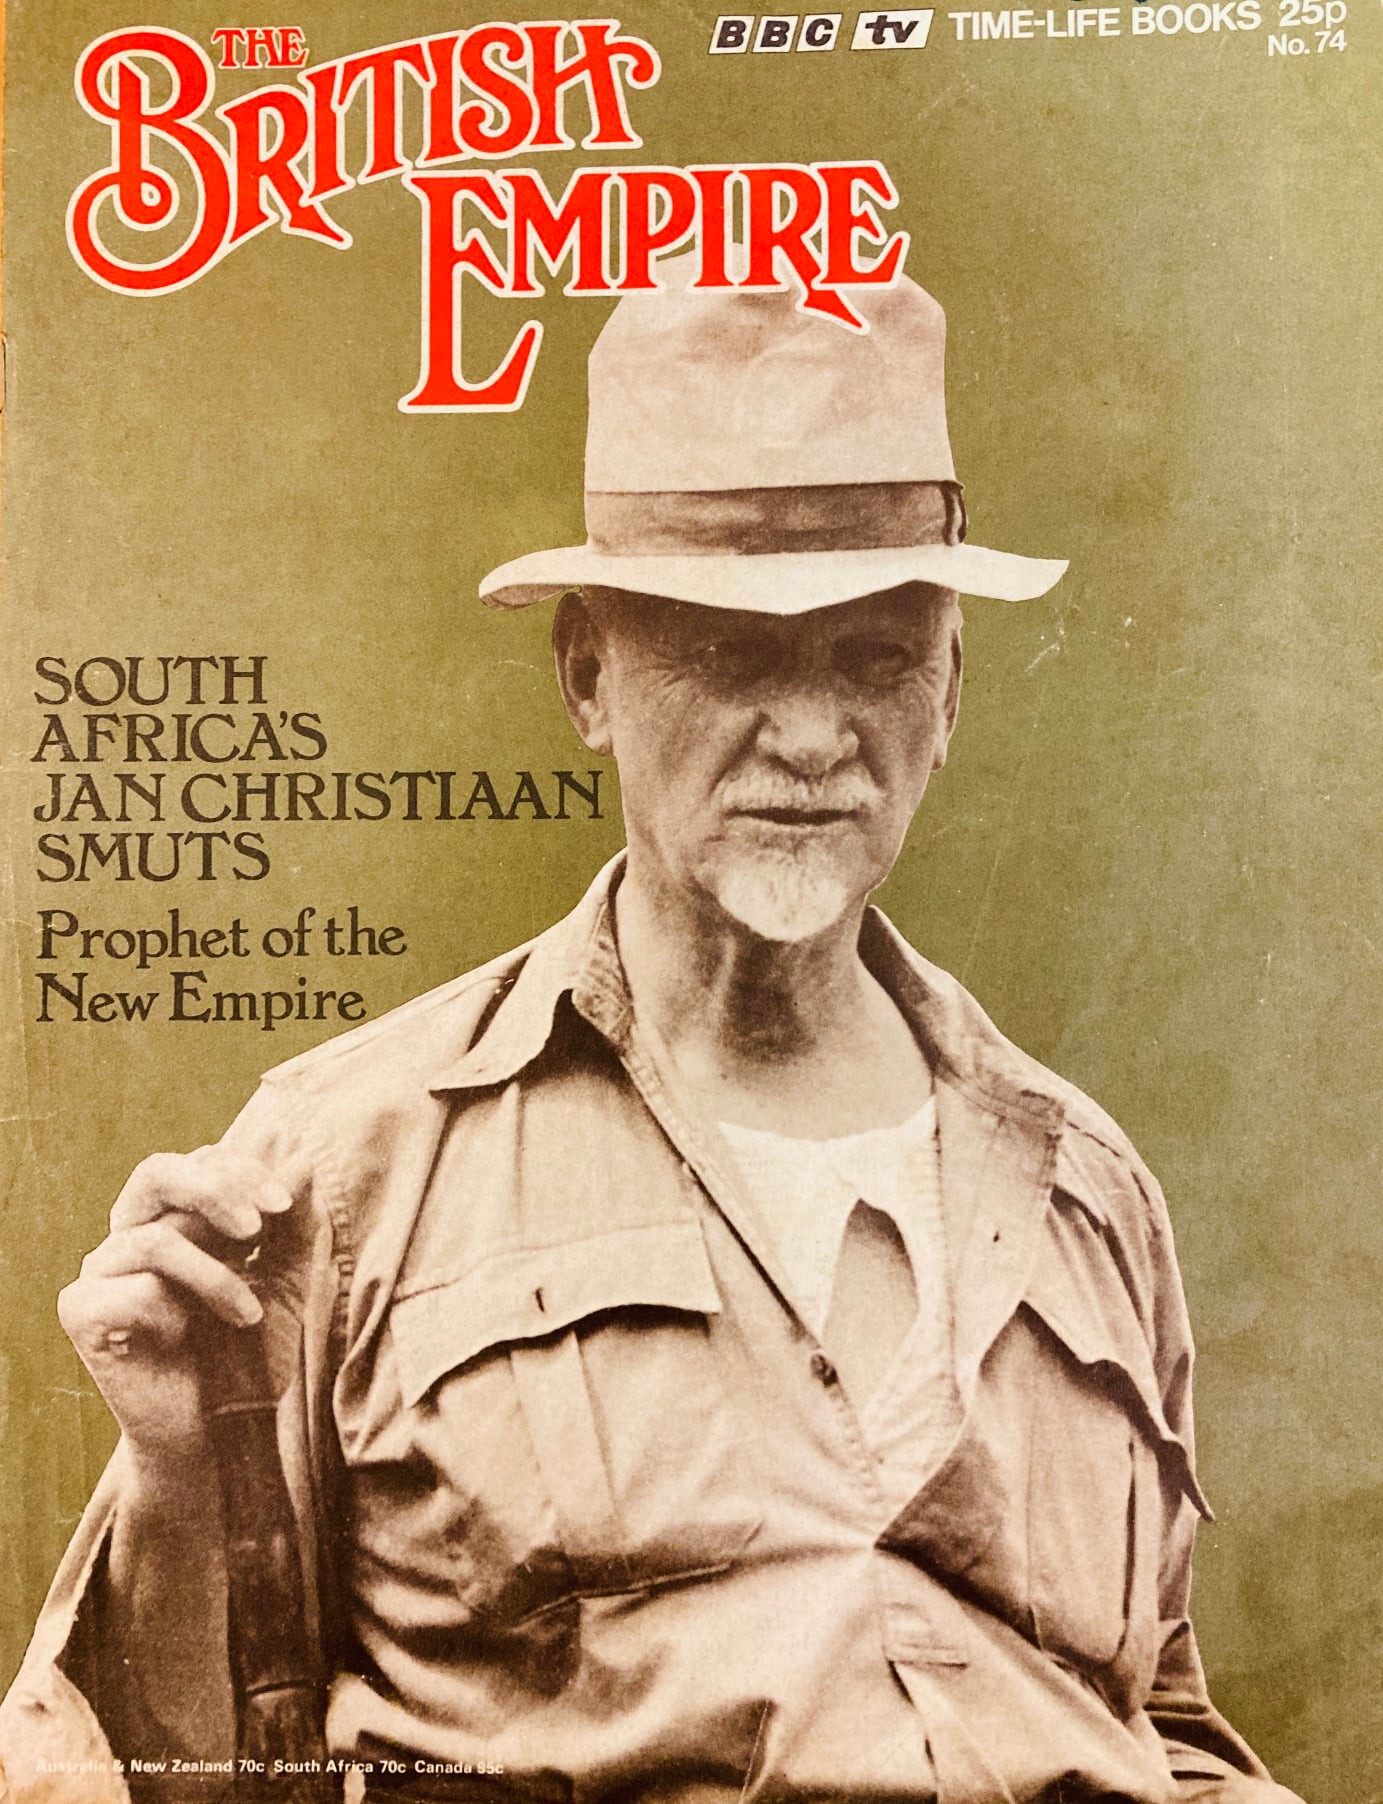 Magazine cover showing article about Jan Smuts titled 'Prophet of the New Empire' and a photograph of Smuts